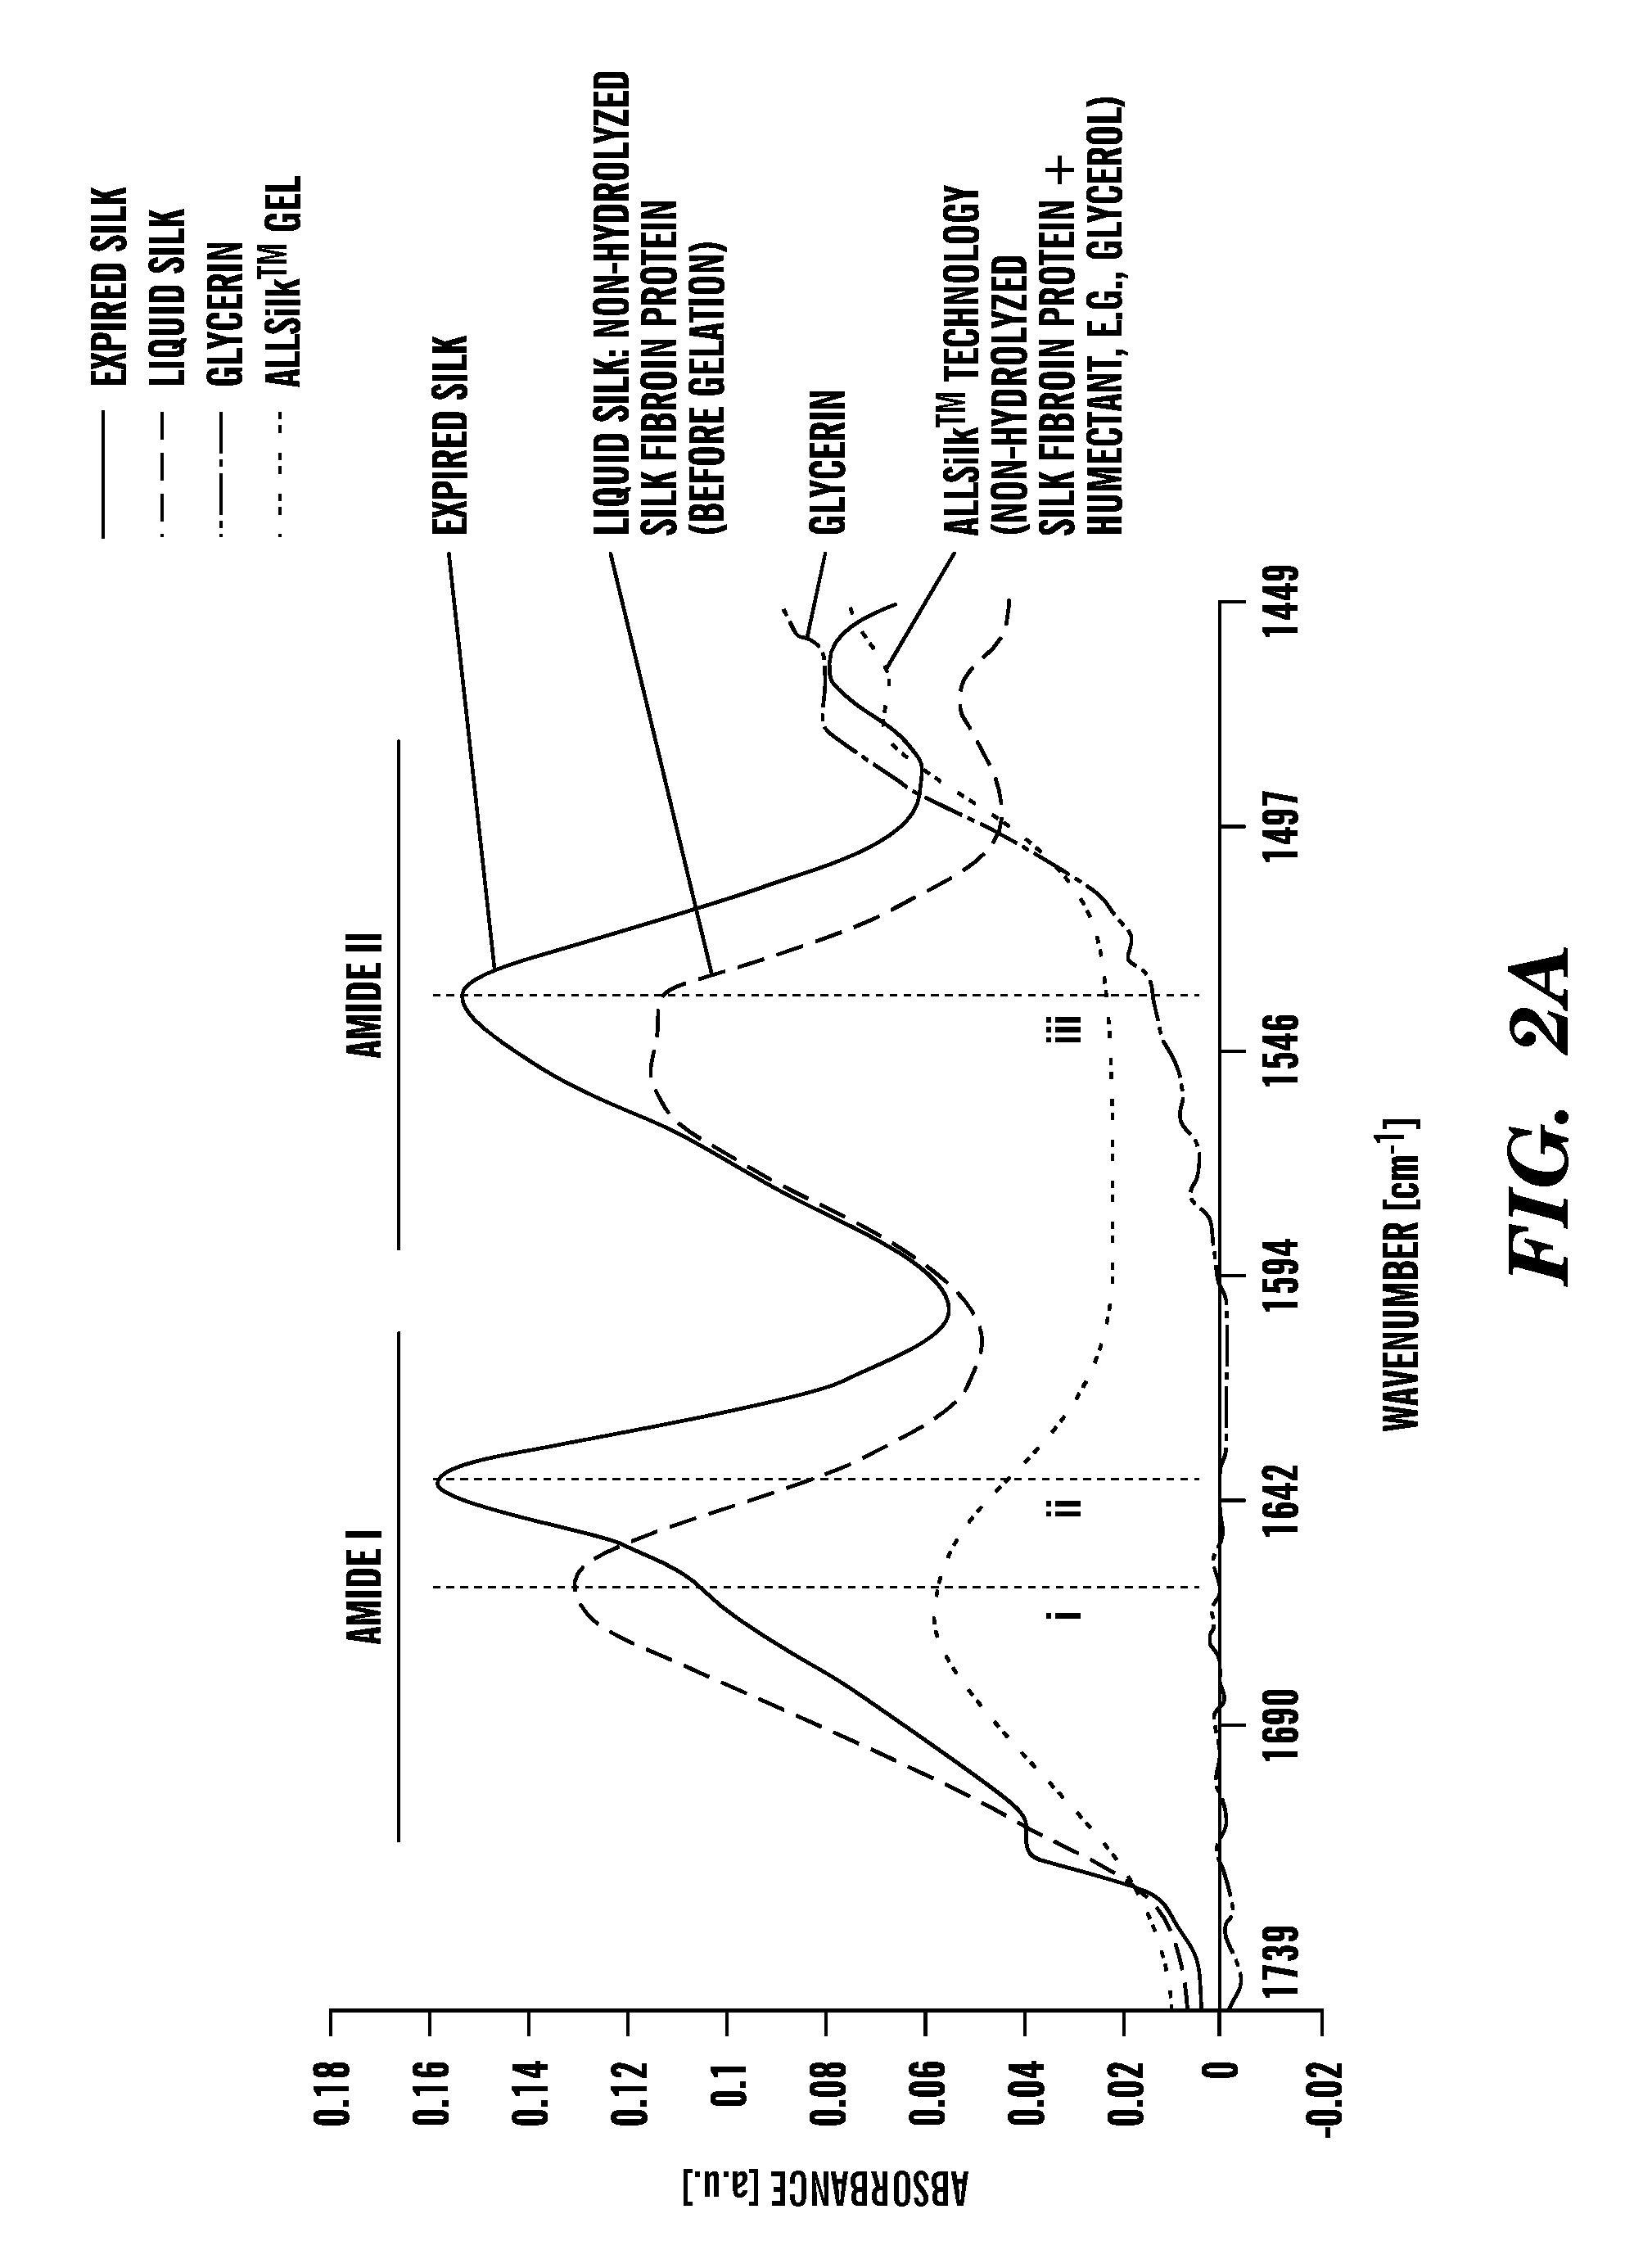 Silk fibroin-based personal care compositions